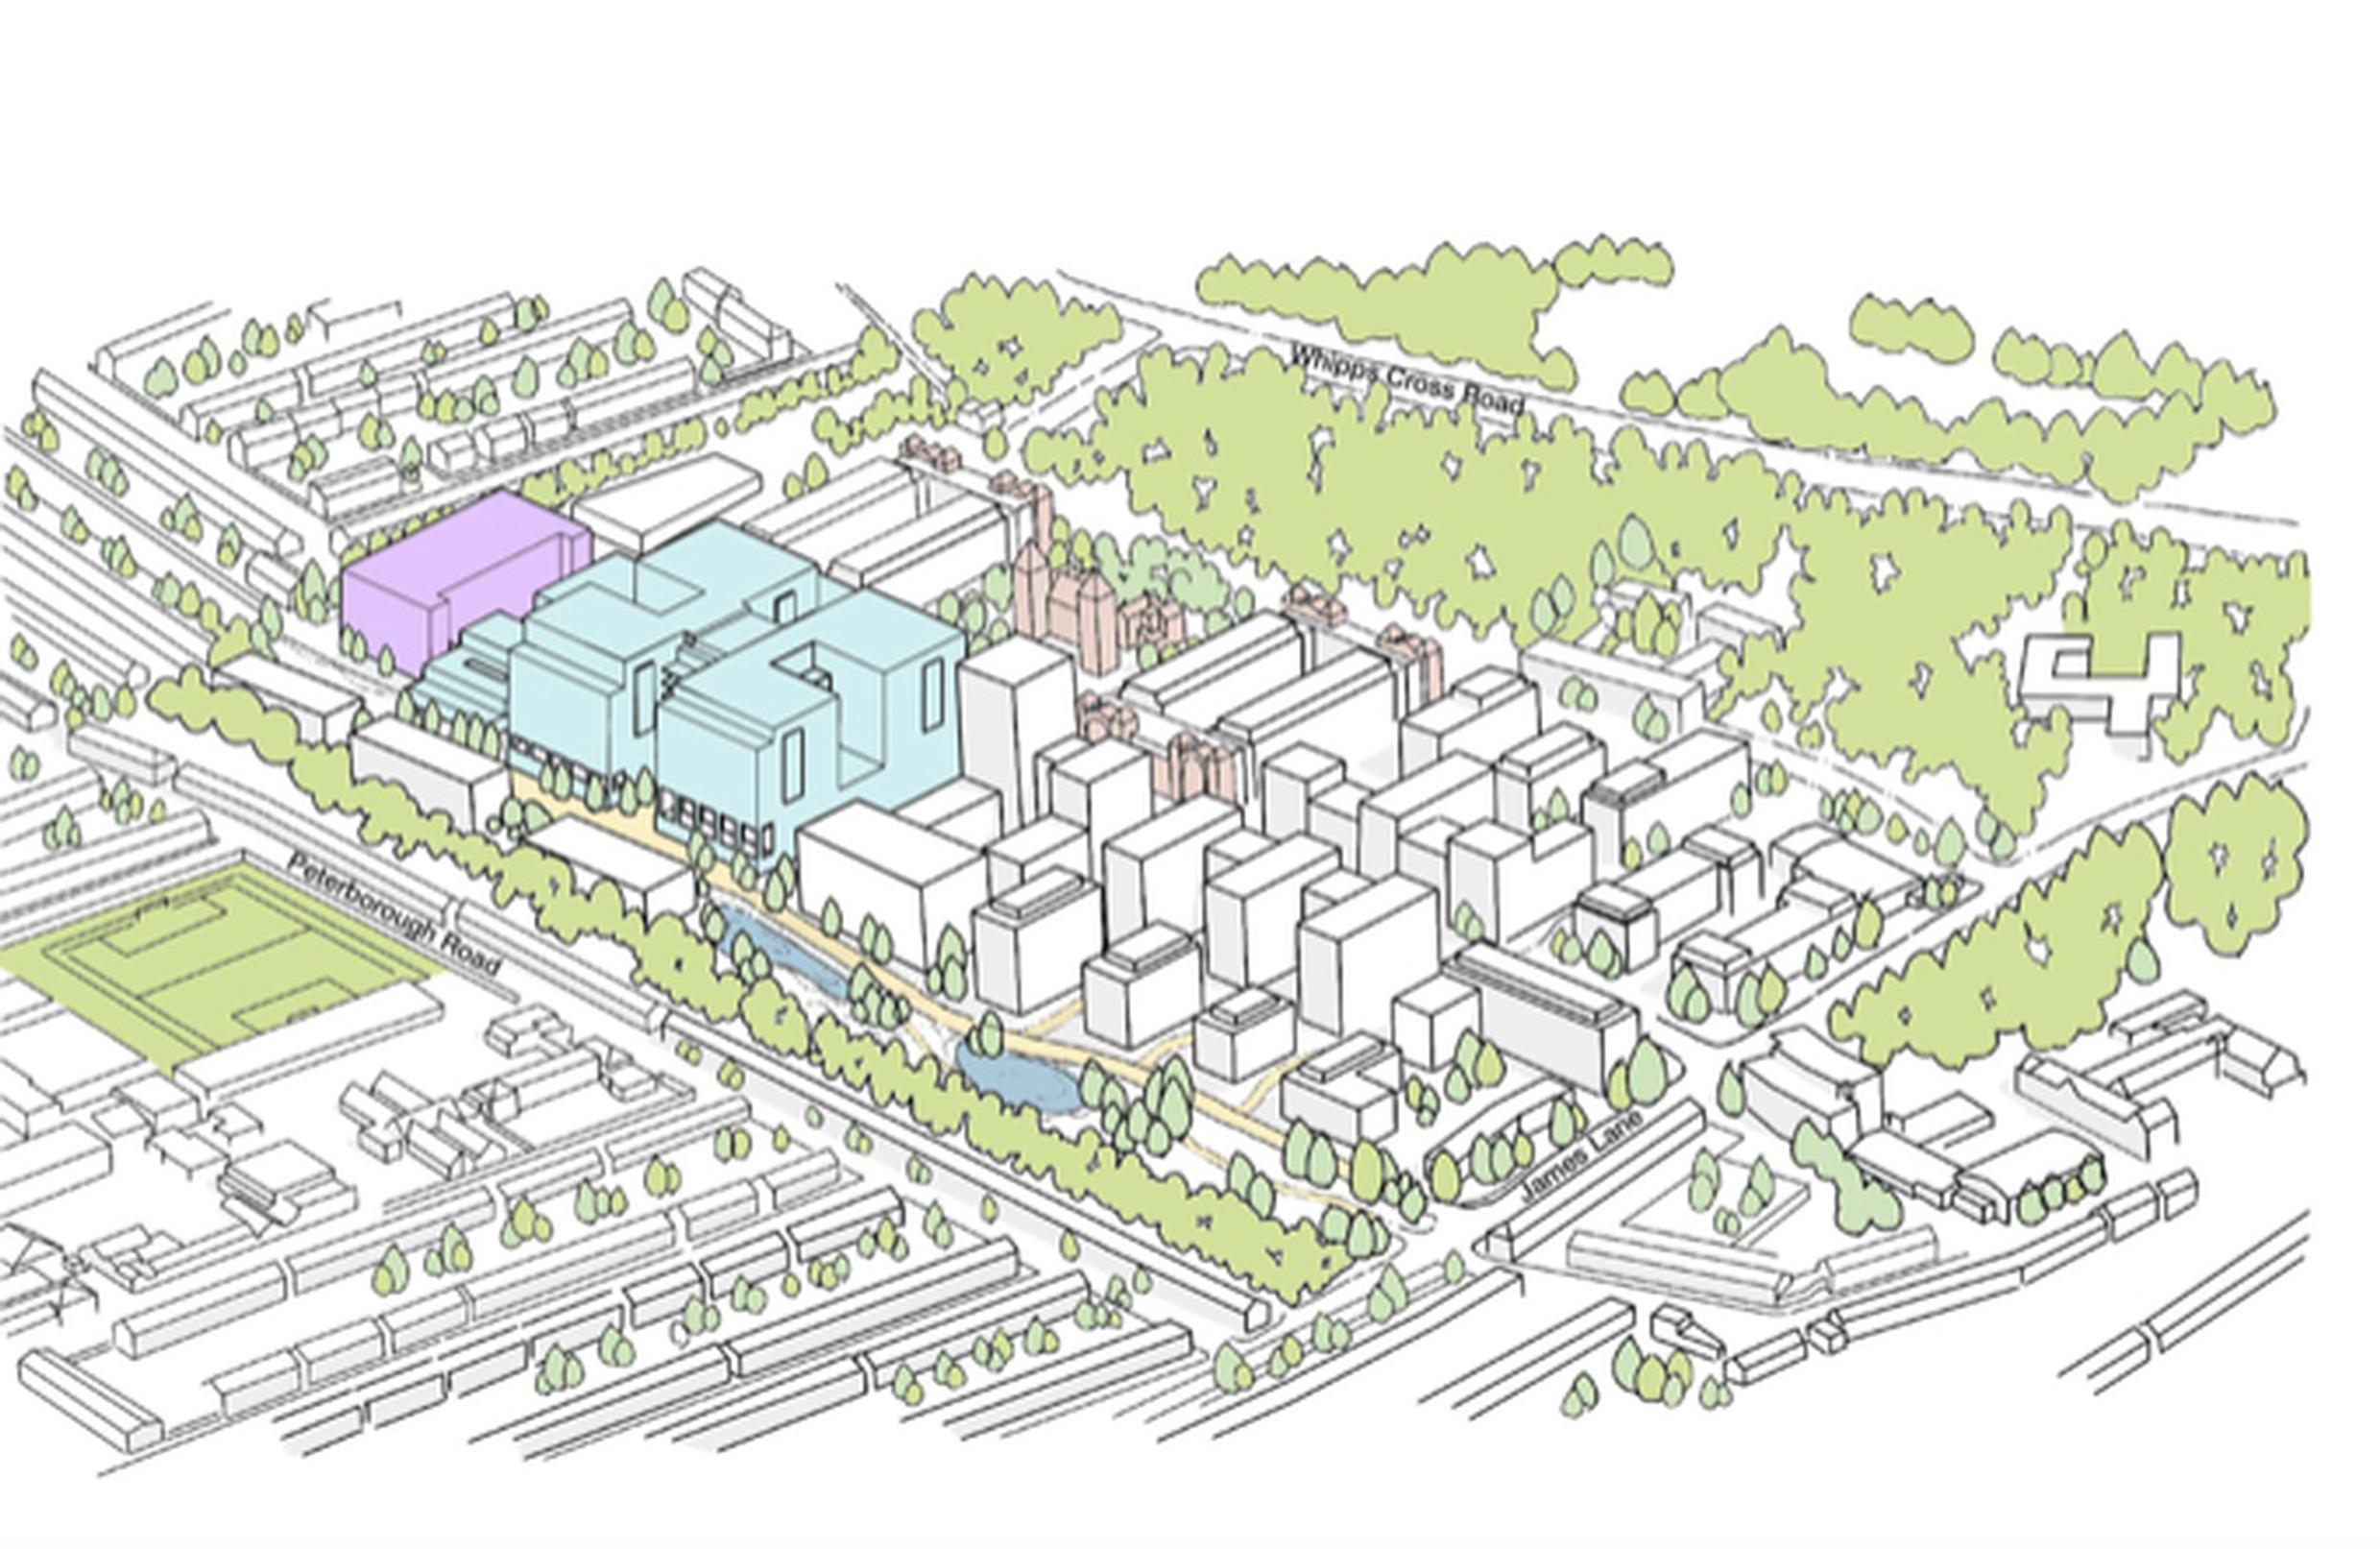 The updated proposals for Whipps Cross. The hospital is shaded in blue and the new multi-storey car park is shaded in purple.